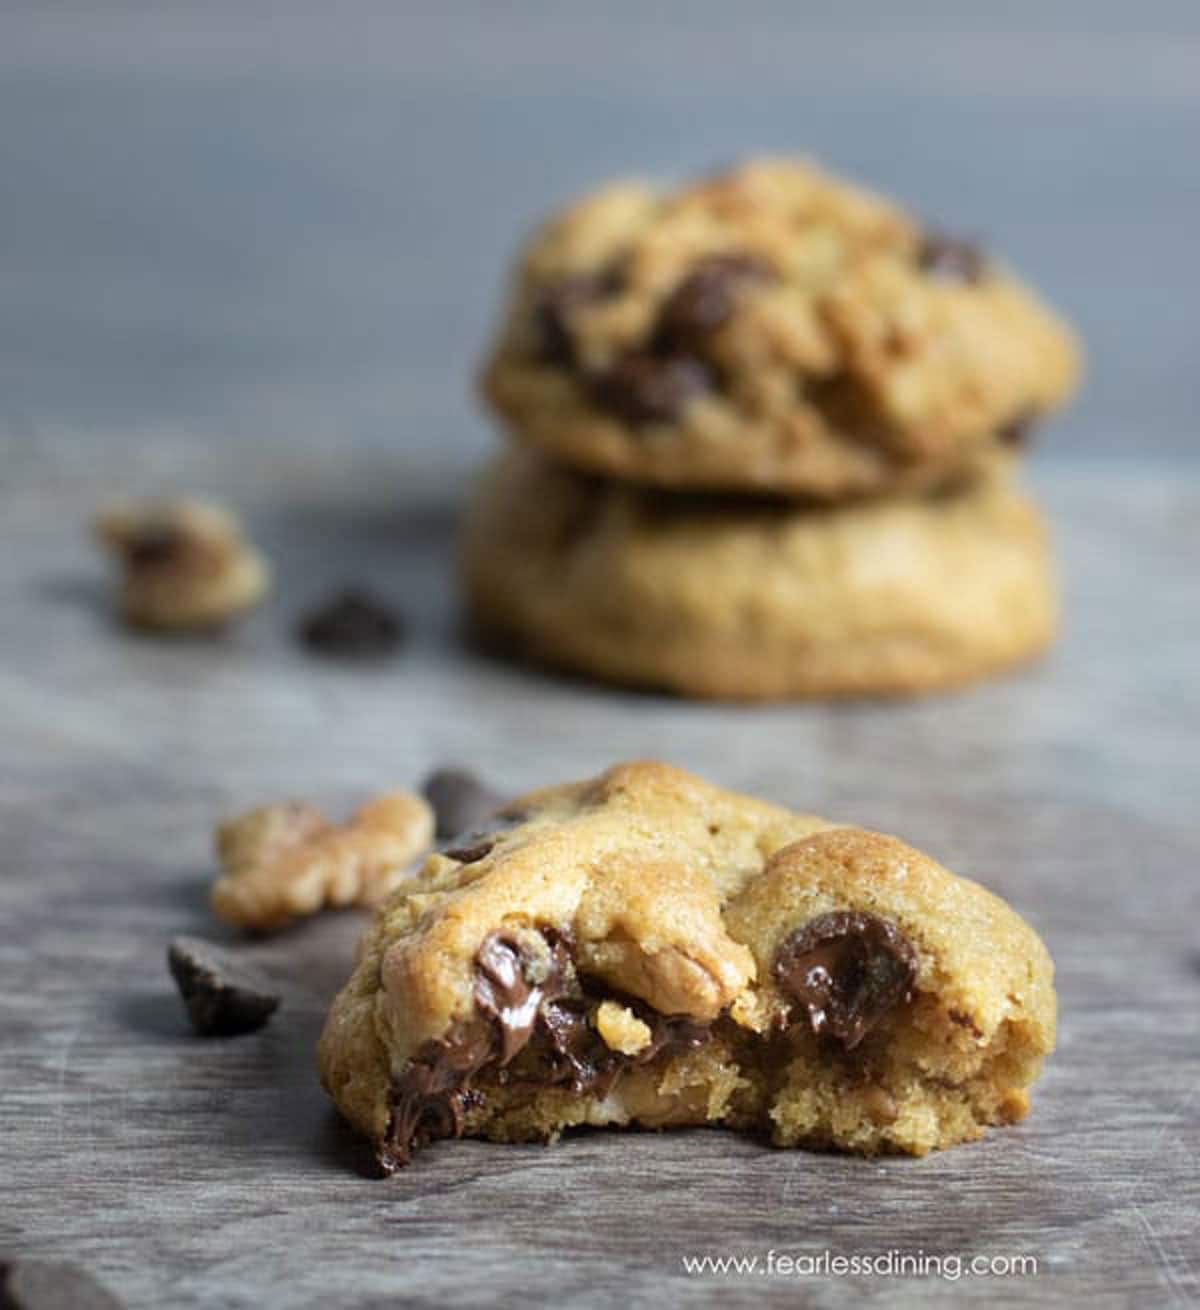 A chocolate chip cookie with a bite missing.